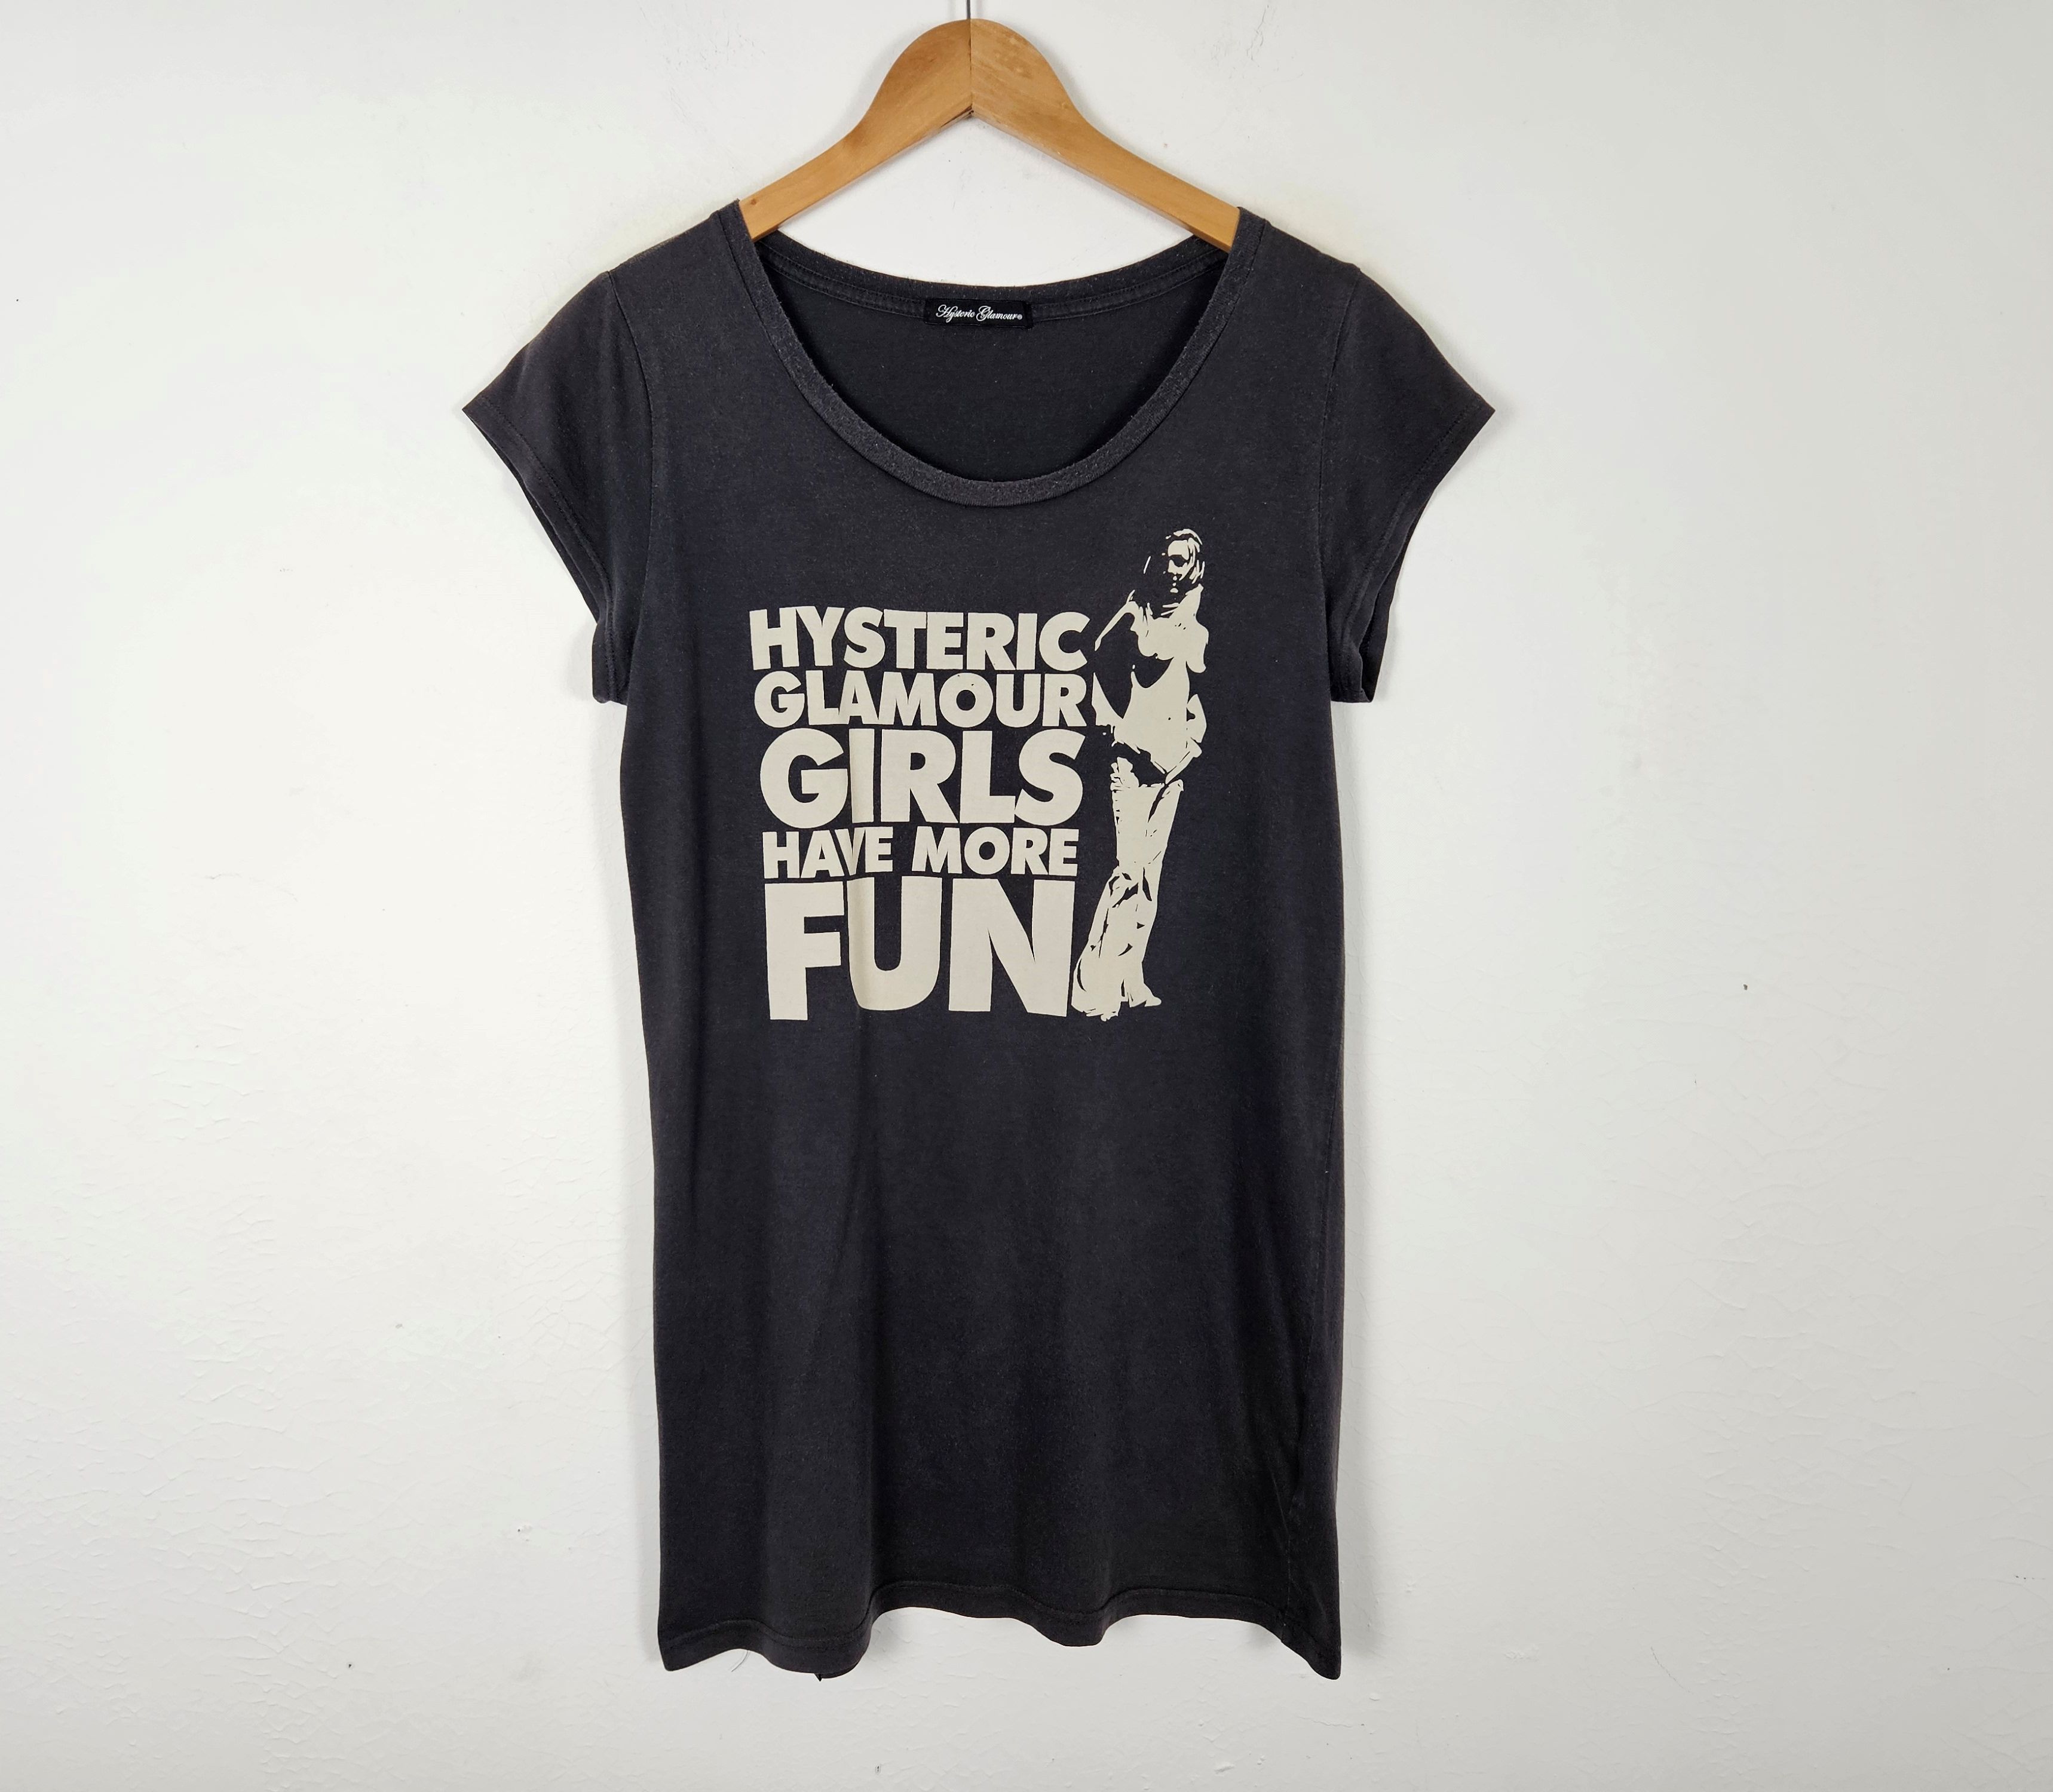 Hysteric Glamour Girls Have More Fun shirt - 2